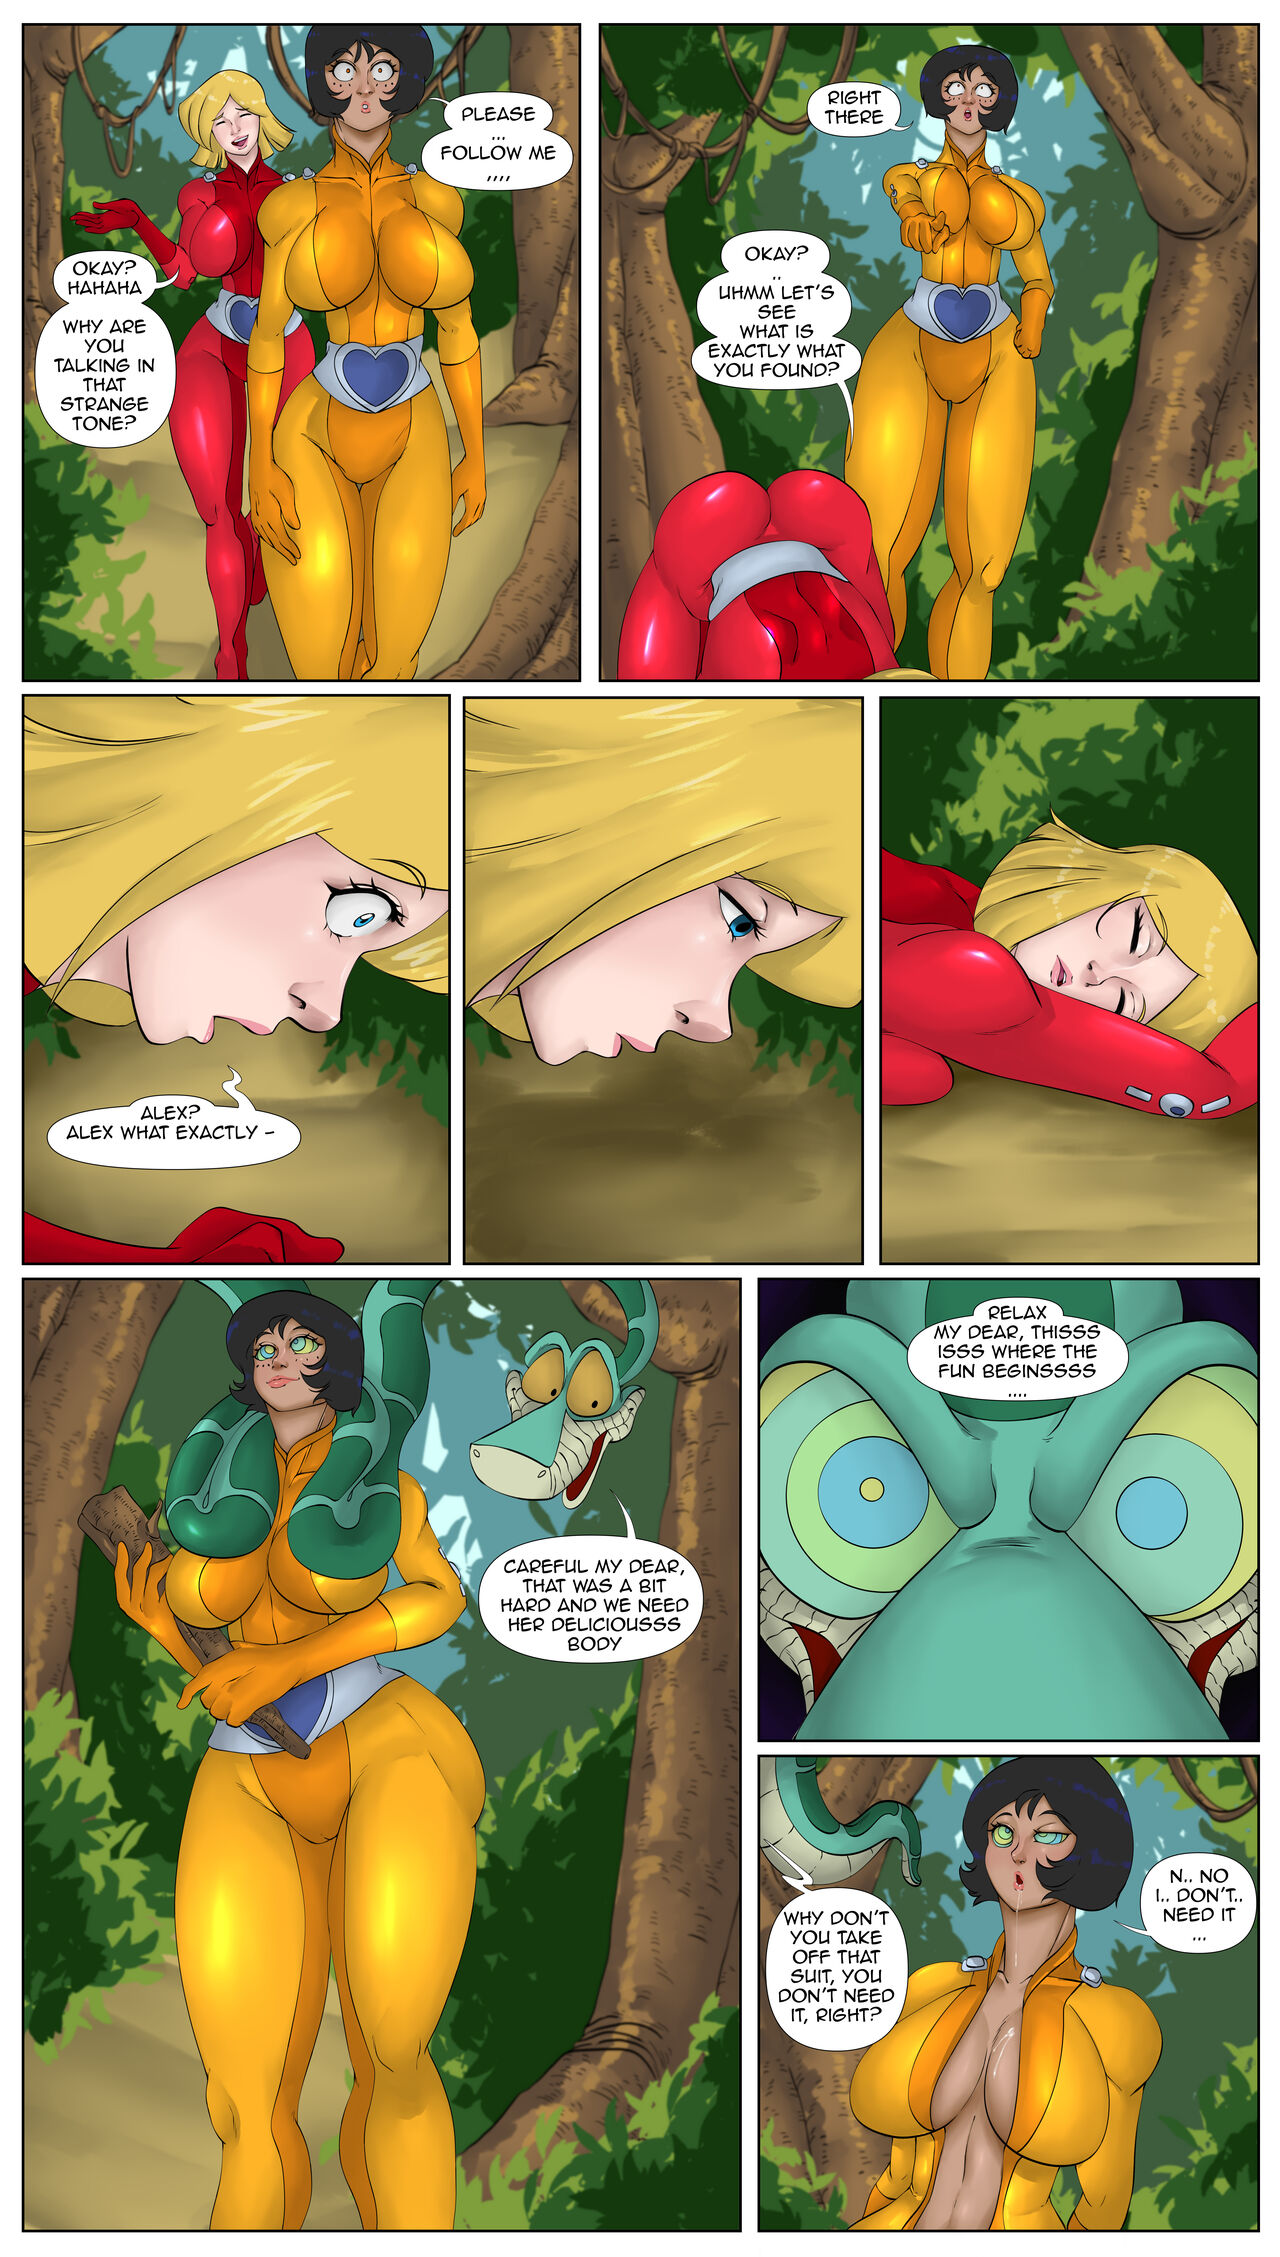 Jungle Stories: Totally Spies (Tomo86)